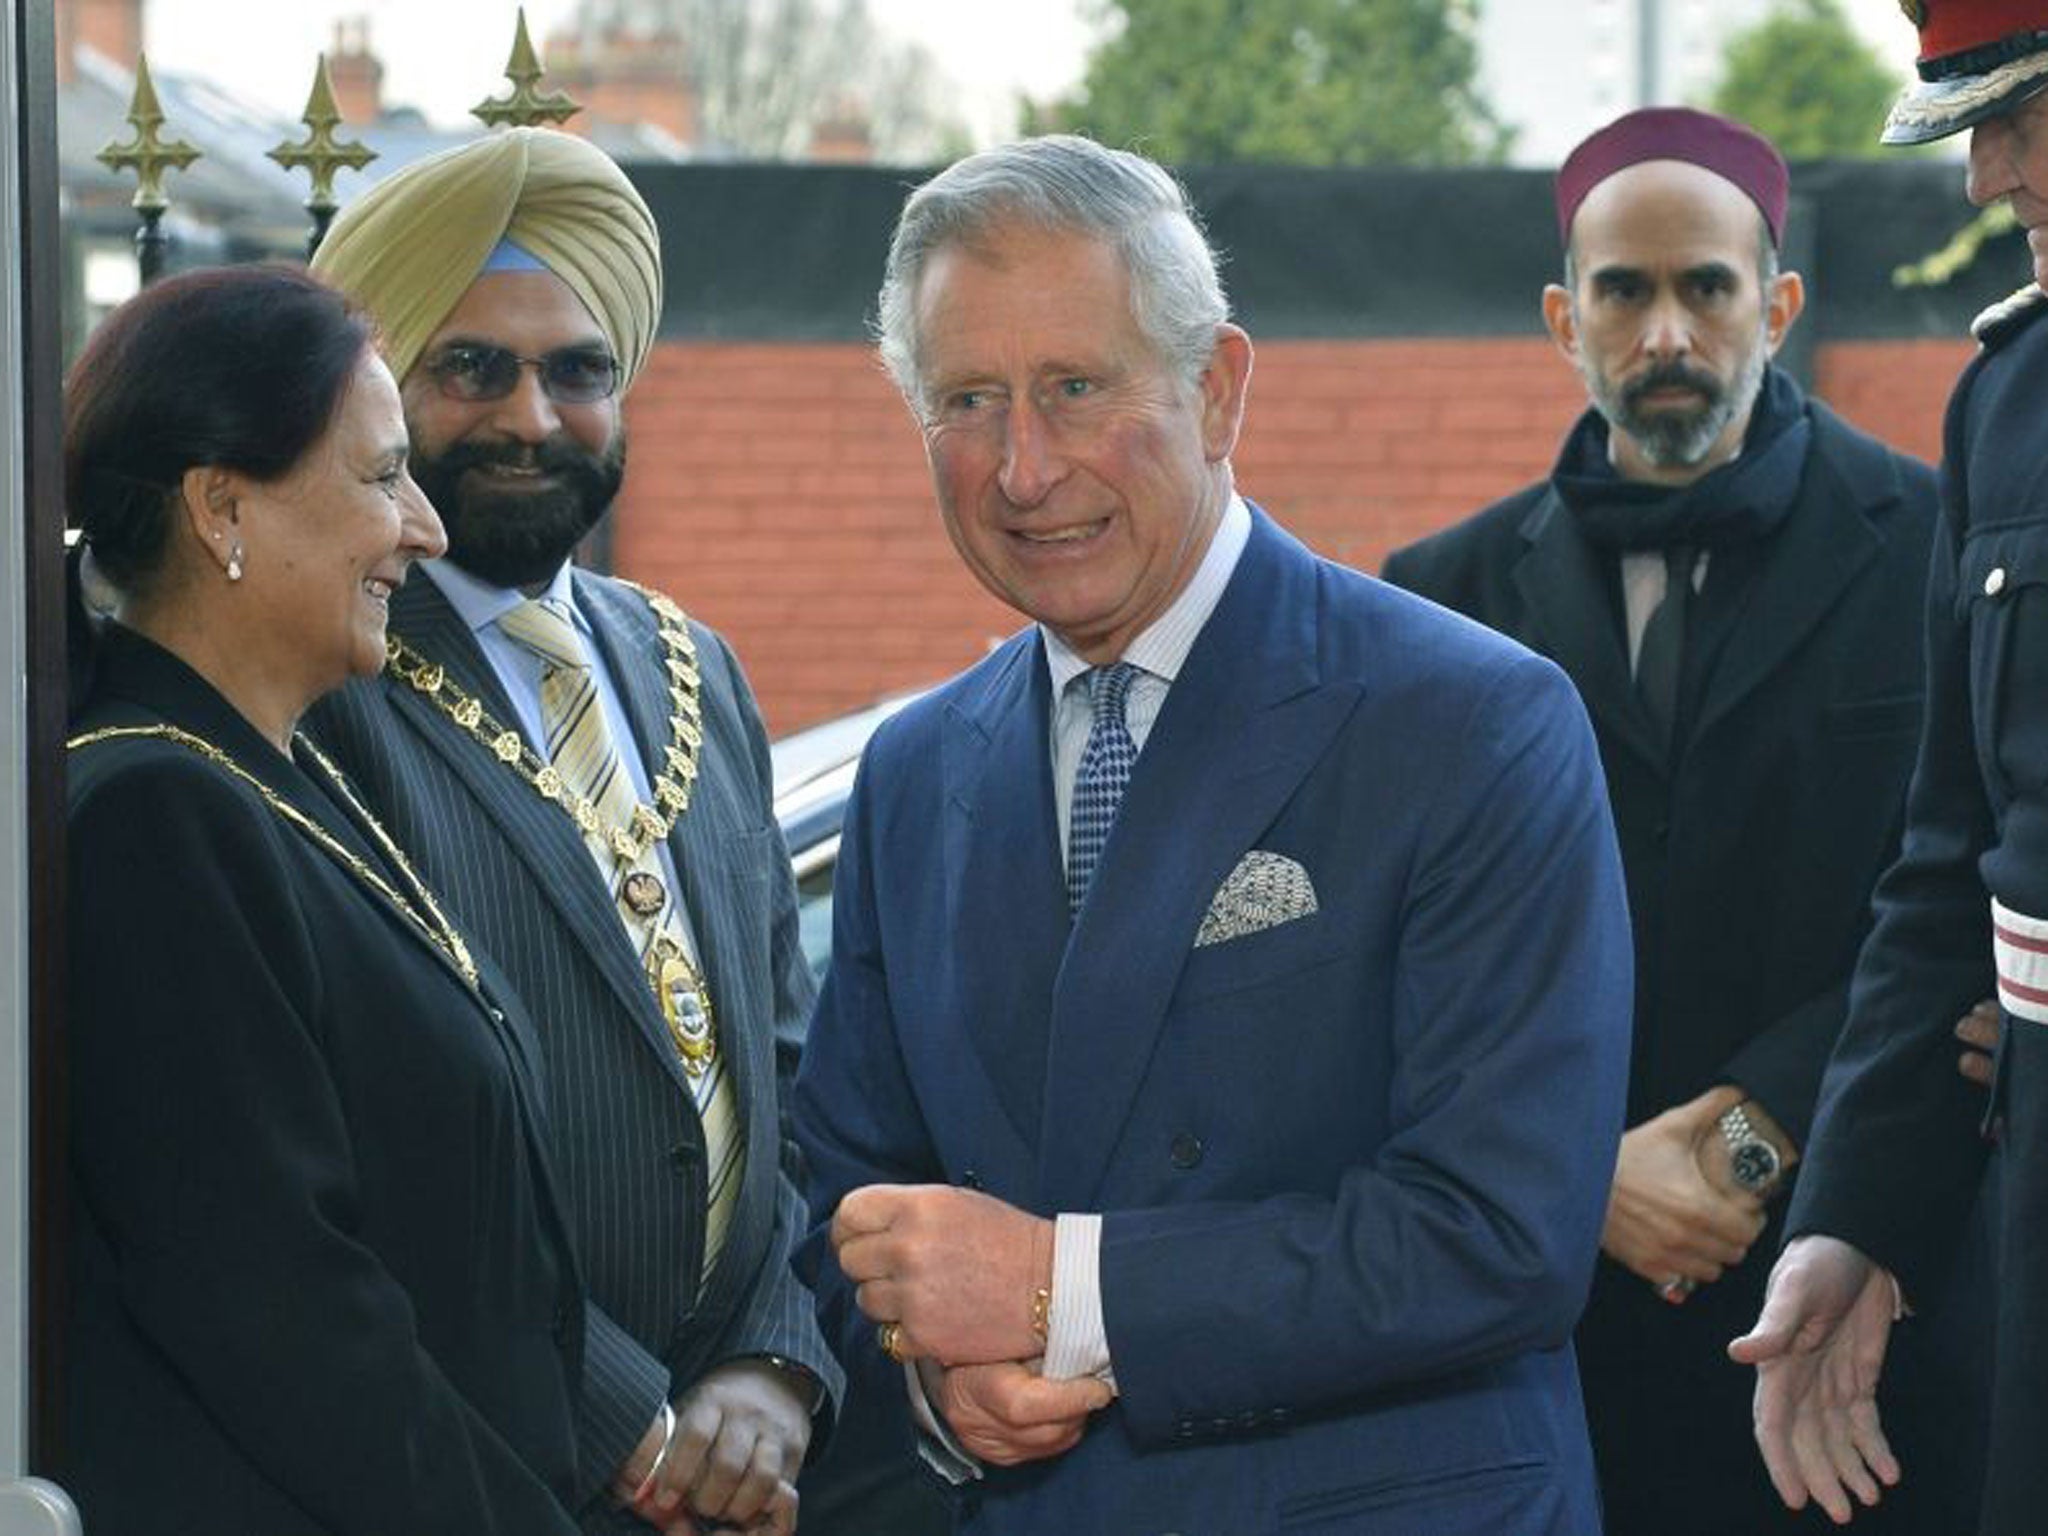 Britain's Prince Charles and Prince Ghazi bin Mohammad of Jordan (right) arrive for a visit to a Syriac Orthodox Church in west London